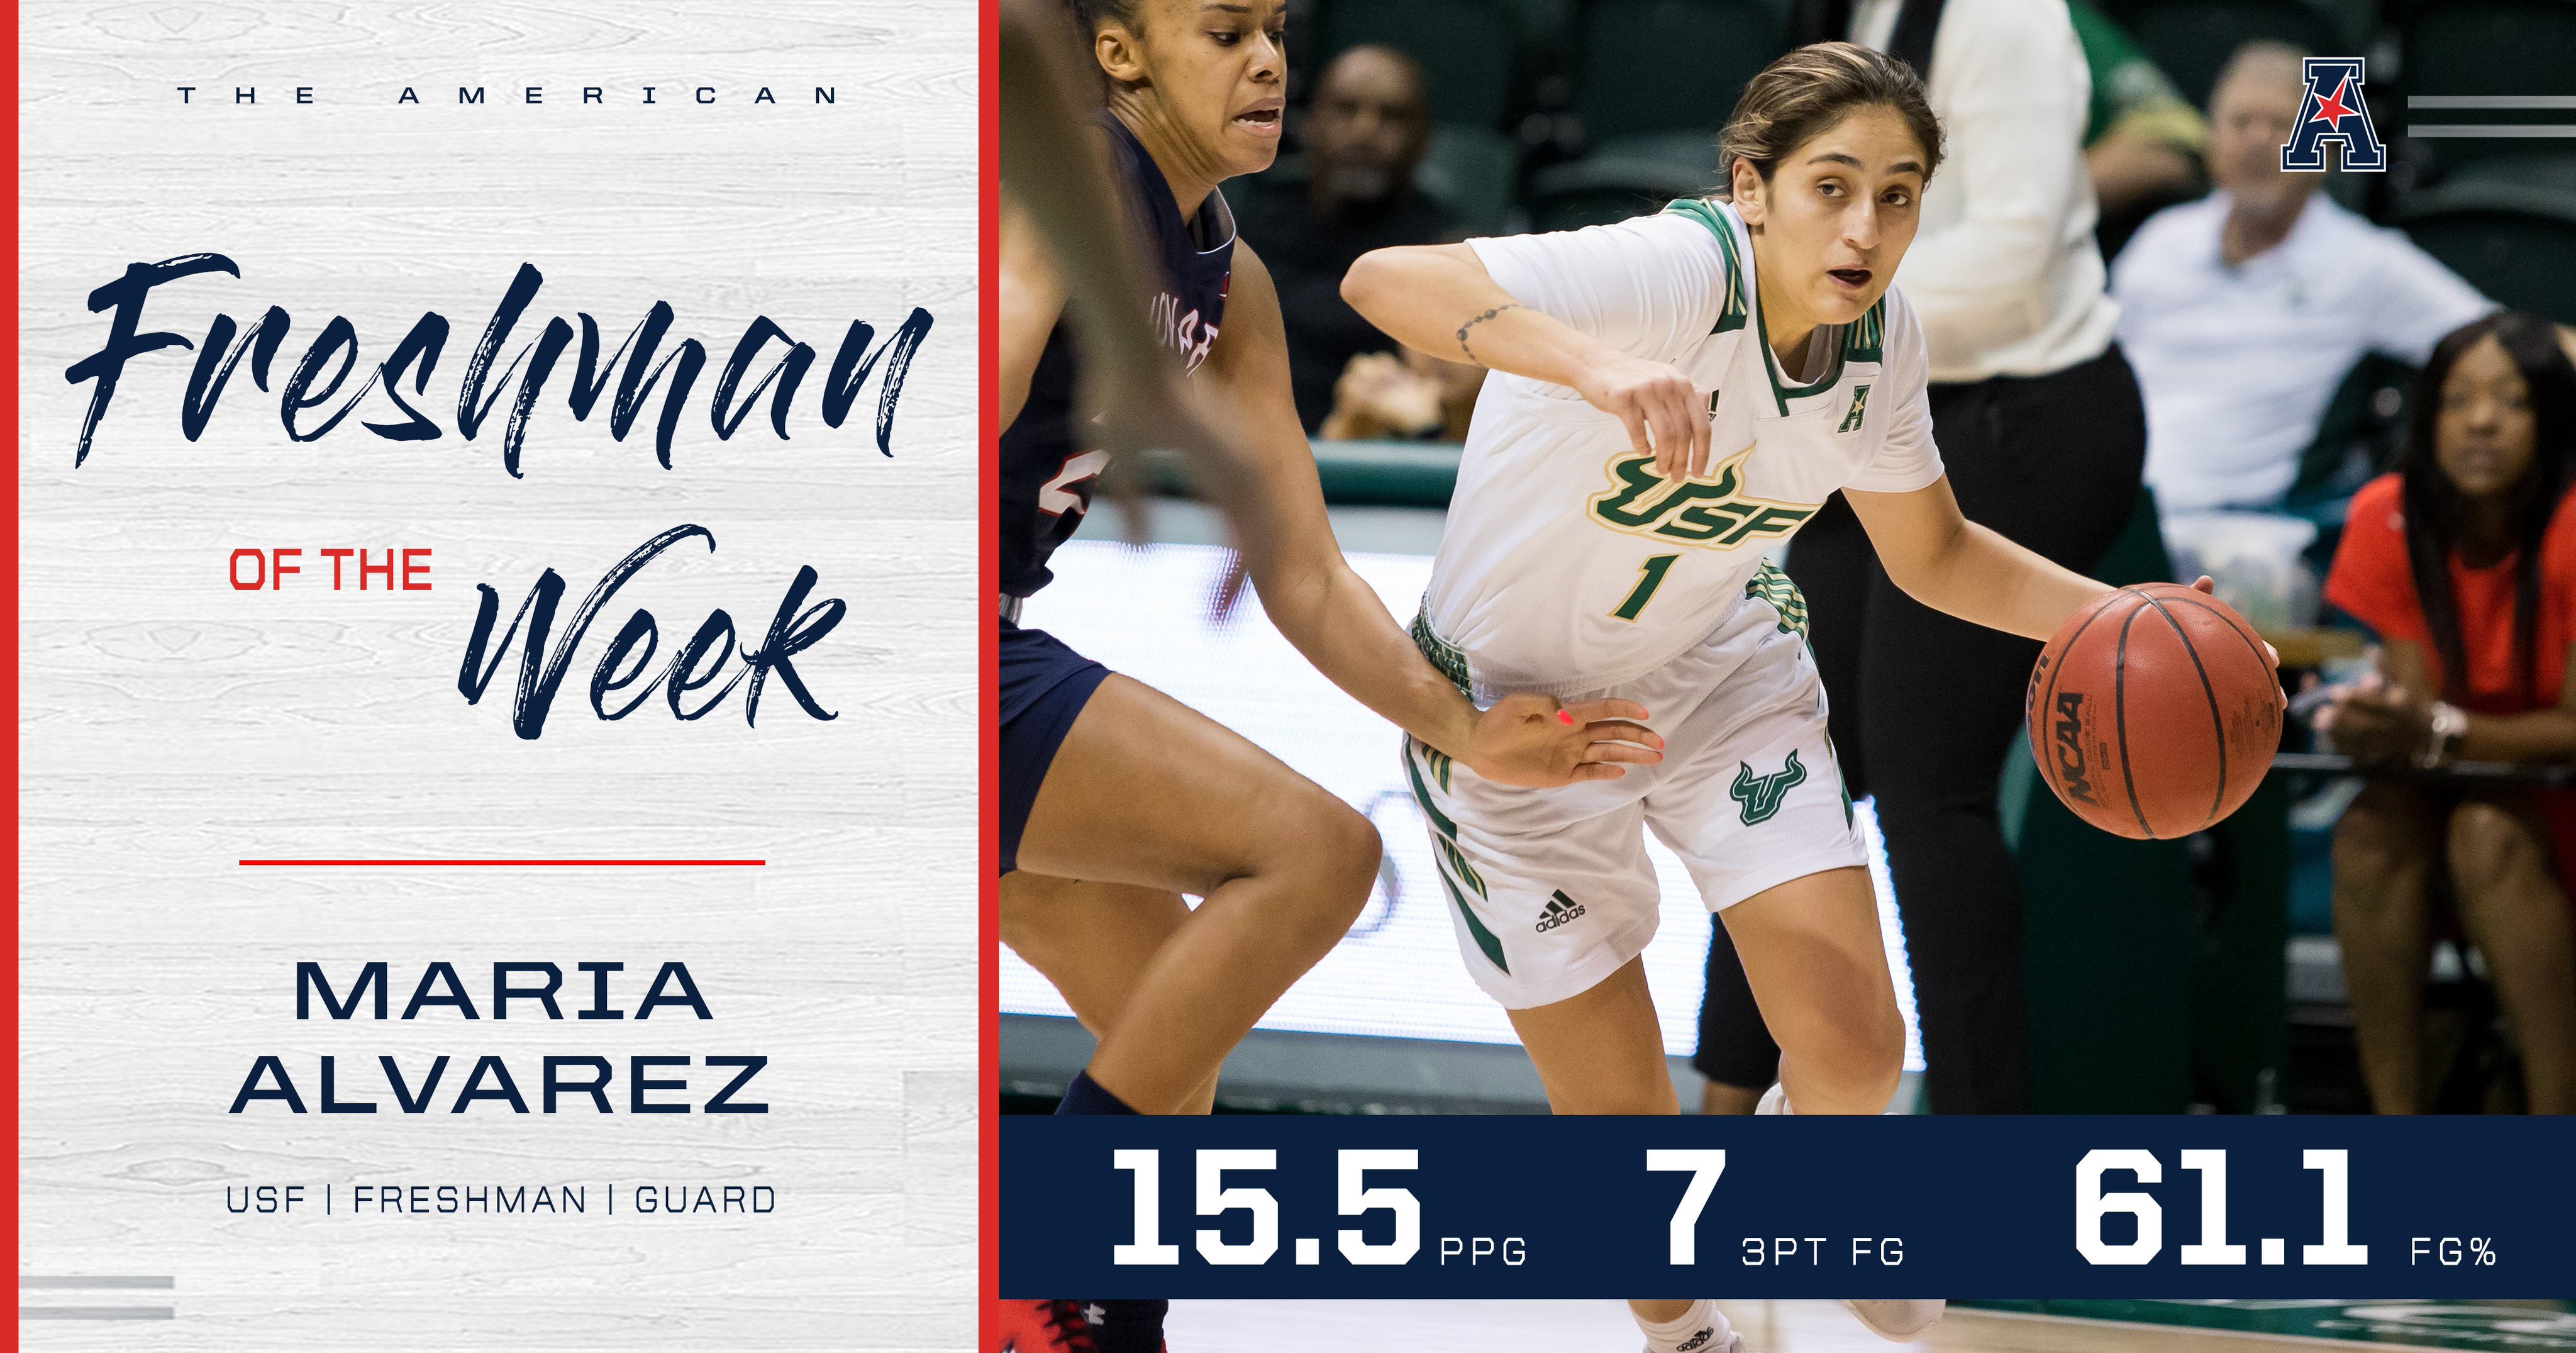 Maria Alvarez announced as the American Athletic Conference Freshman of the Week